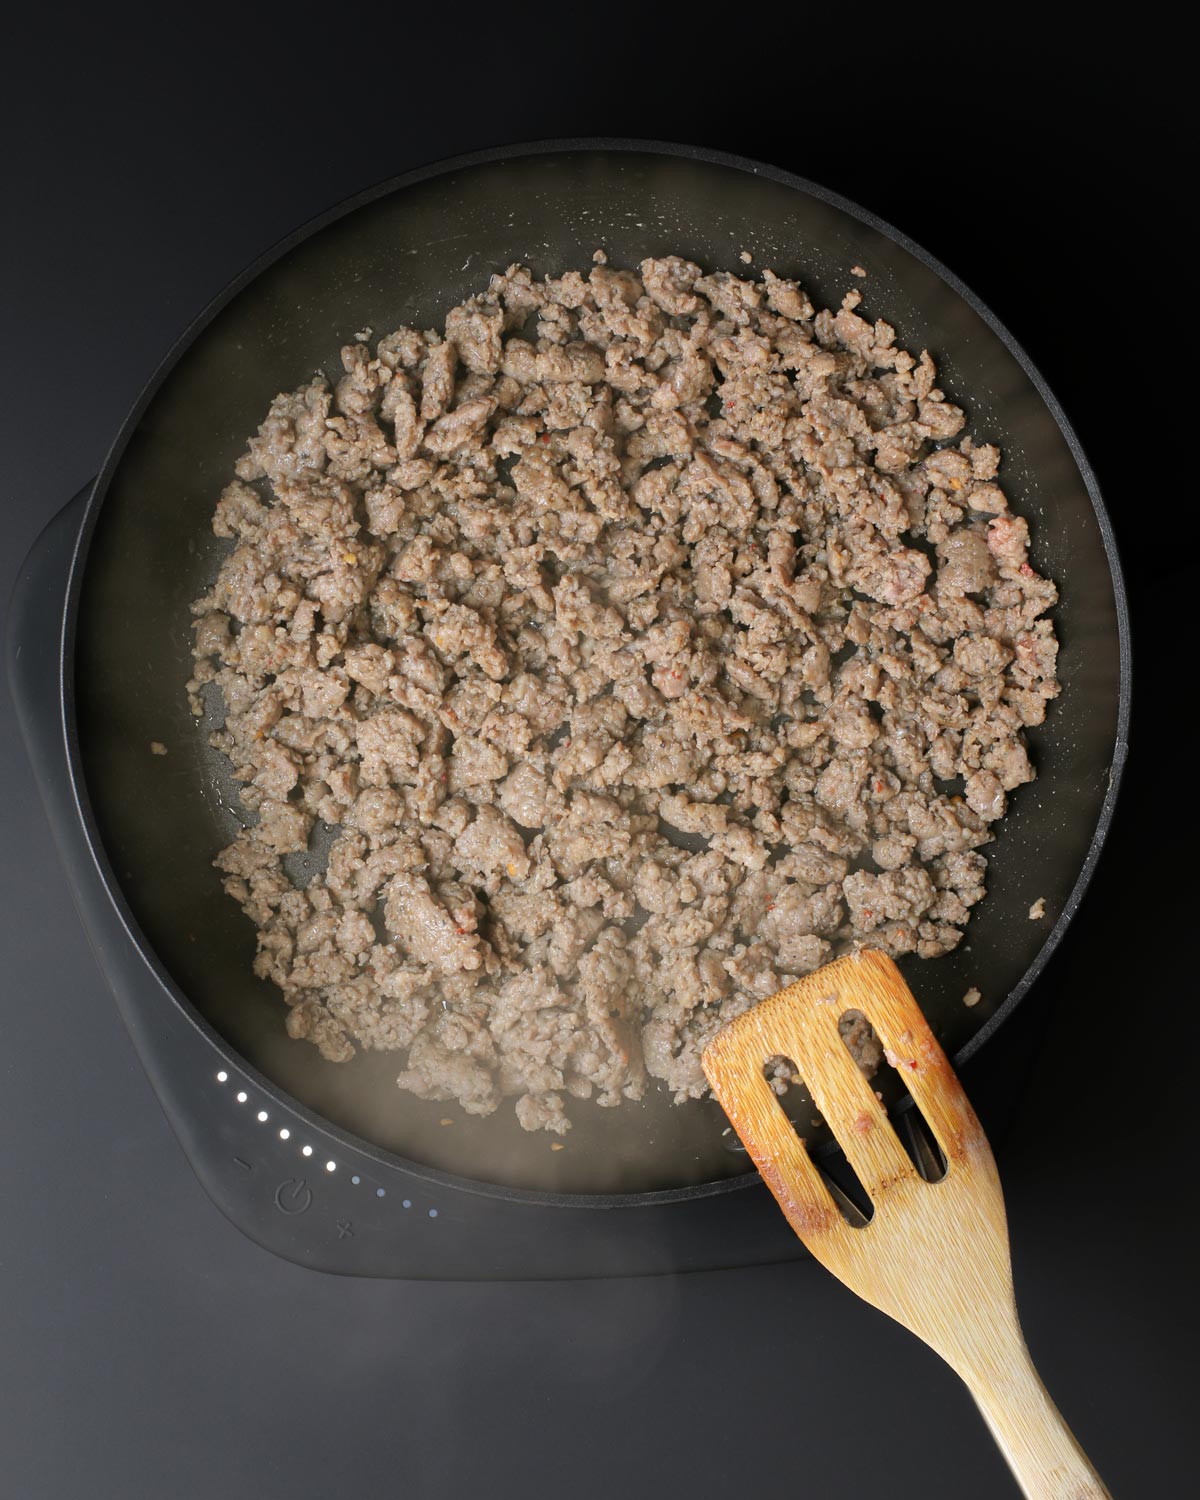 cooked sausage crumbles in skillet with wooden spatula.